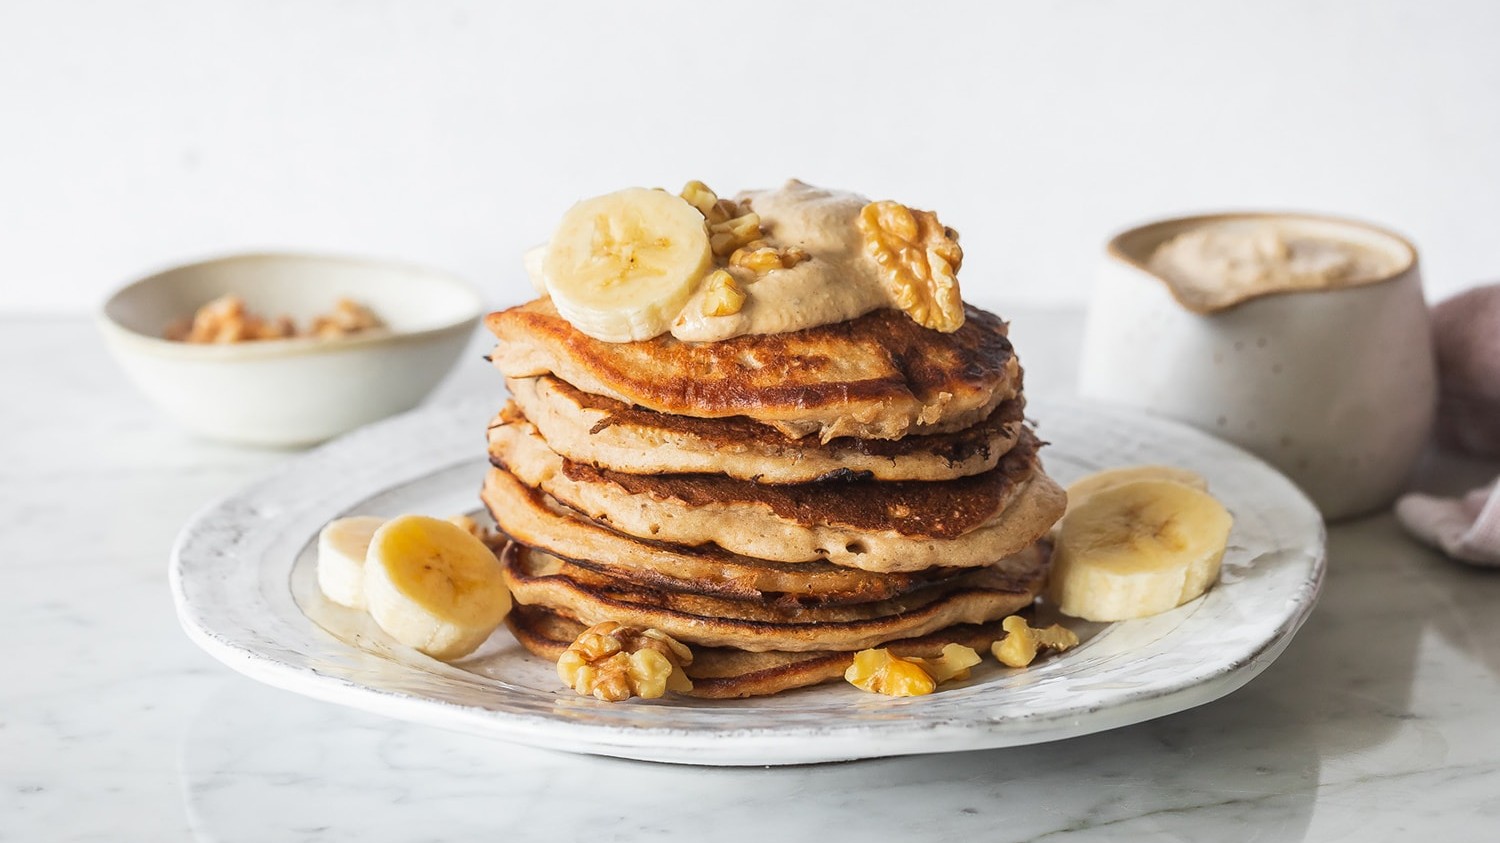 Image of Banana Pancakes with Maple Syrup and Walnuts